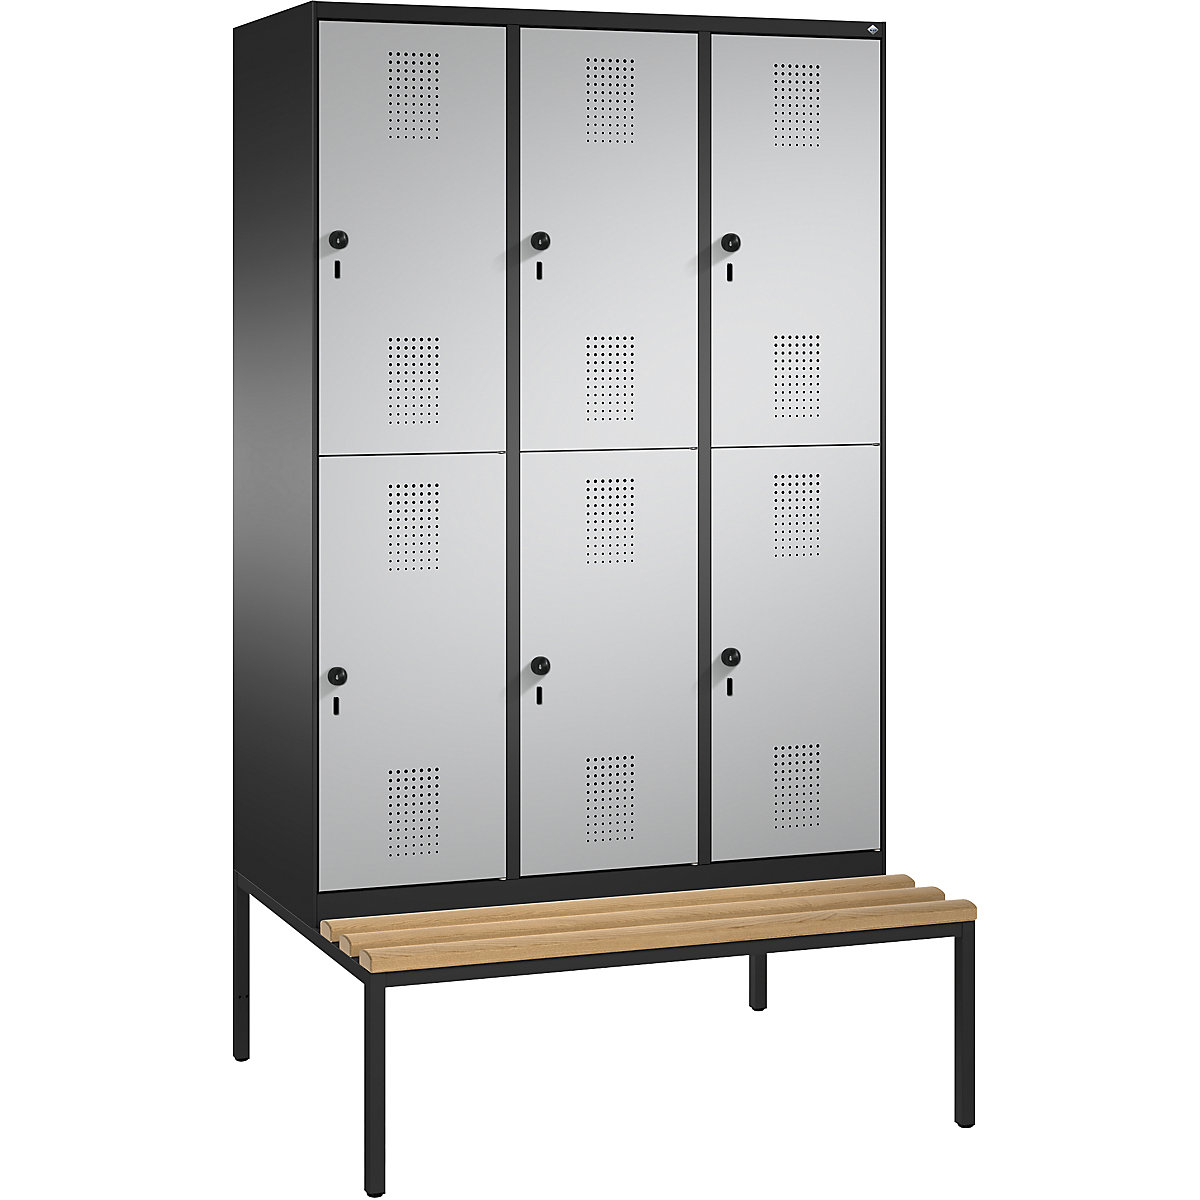 EVOLO cloakroom locker, double tier, with bench – C+P